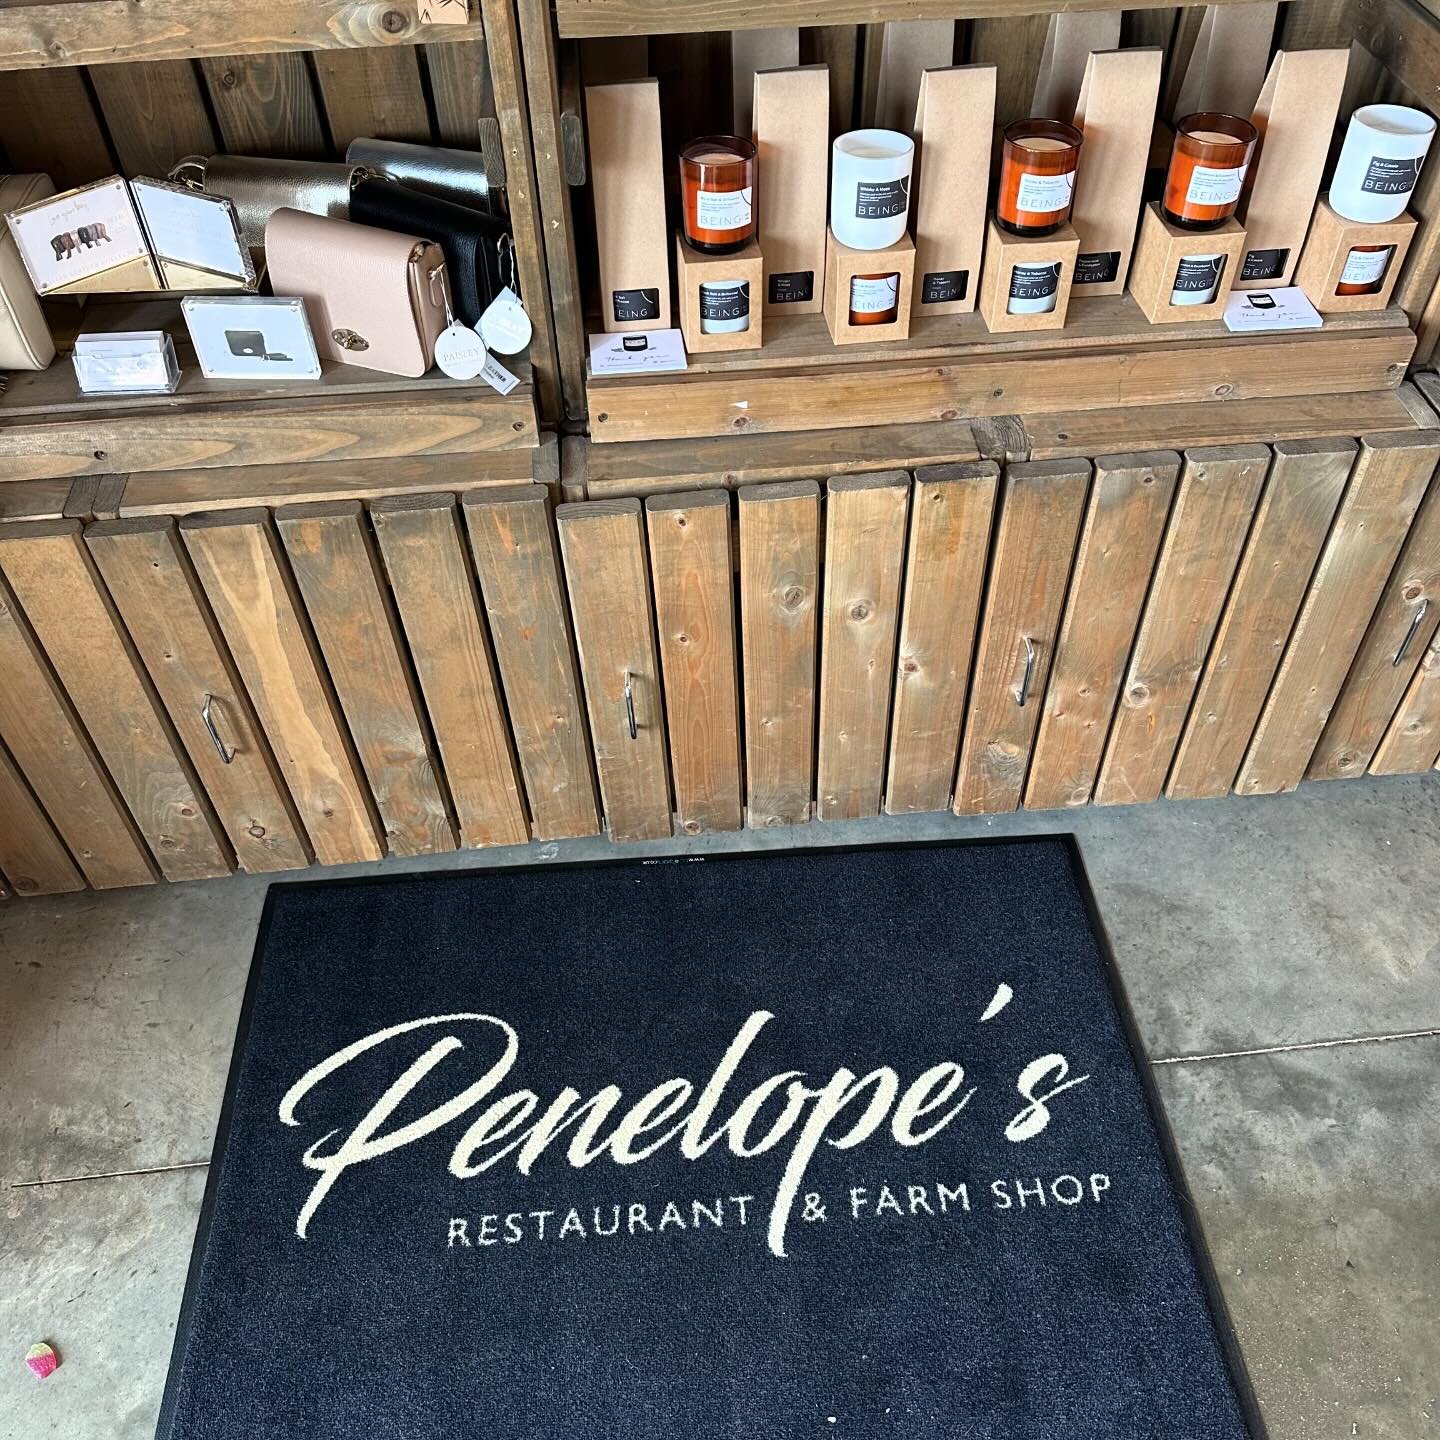 NEW STOCKIST ALERT 📣 

So happy to announce we are now in @penelopes.farmshop 

Massive thank you to Demi and the team for having us 🫶🏼 

We sat and ate breakfast in the restaurant this morning and it was delicious 😋 

Such a lovely location with